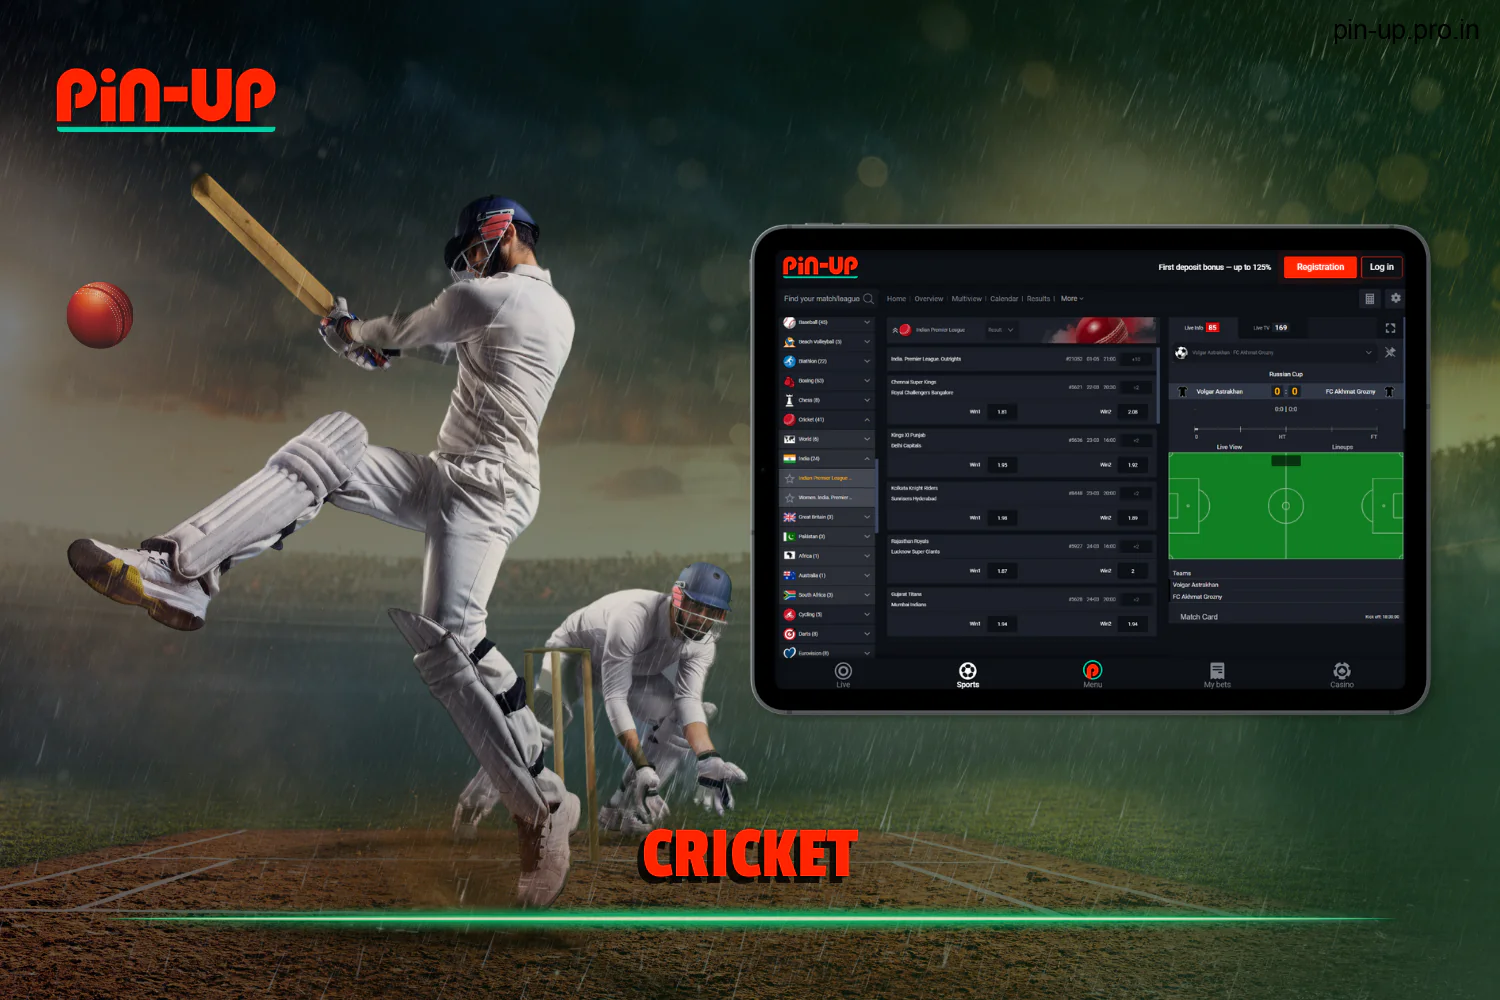 Indian users of PinUp can participate in cricket betting.